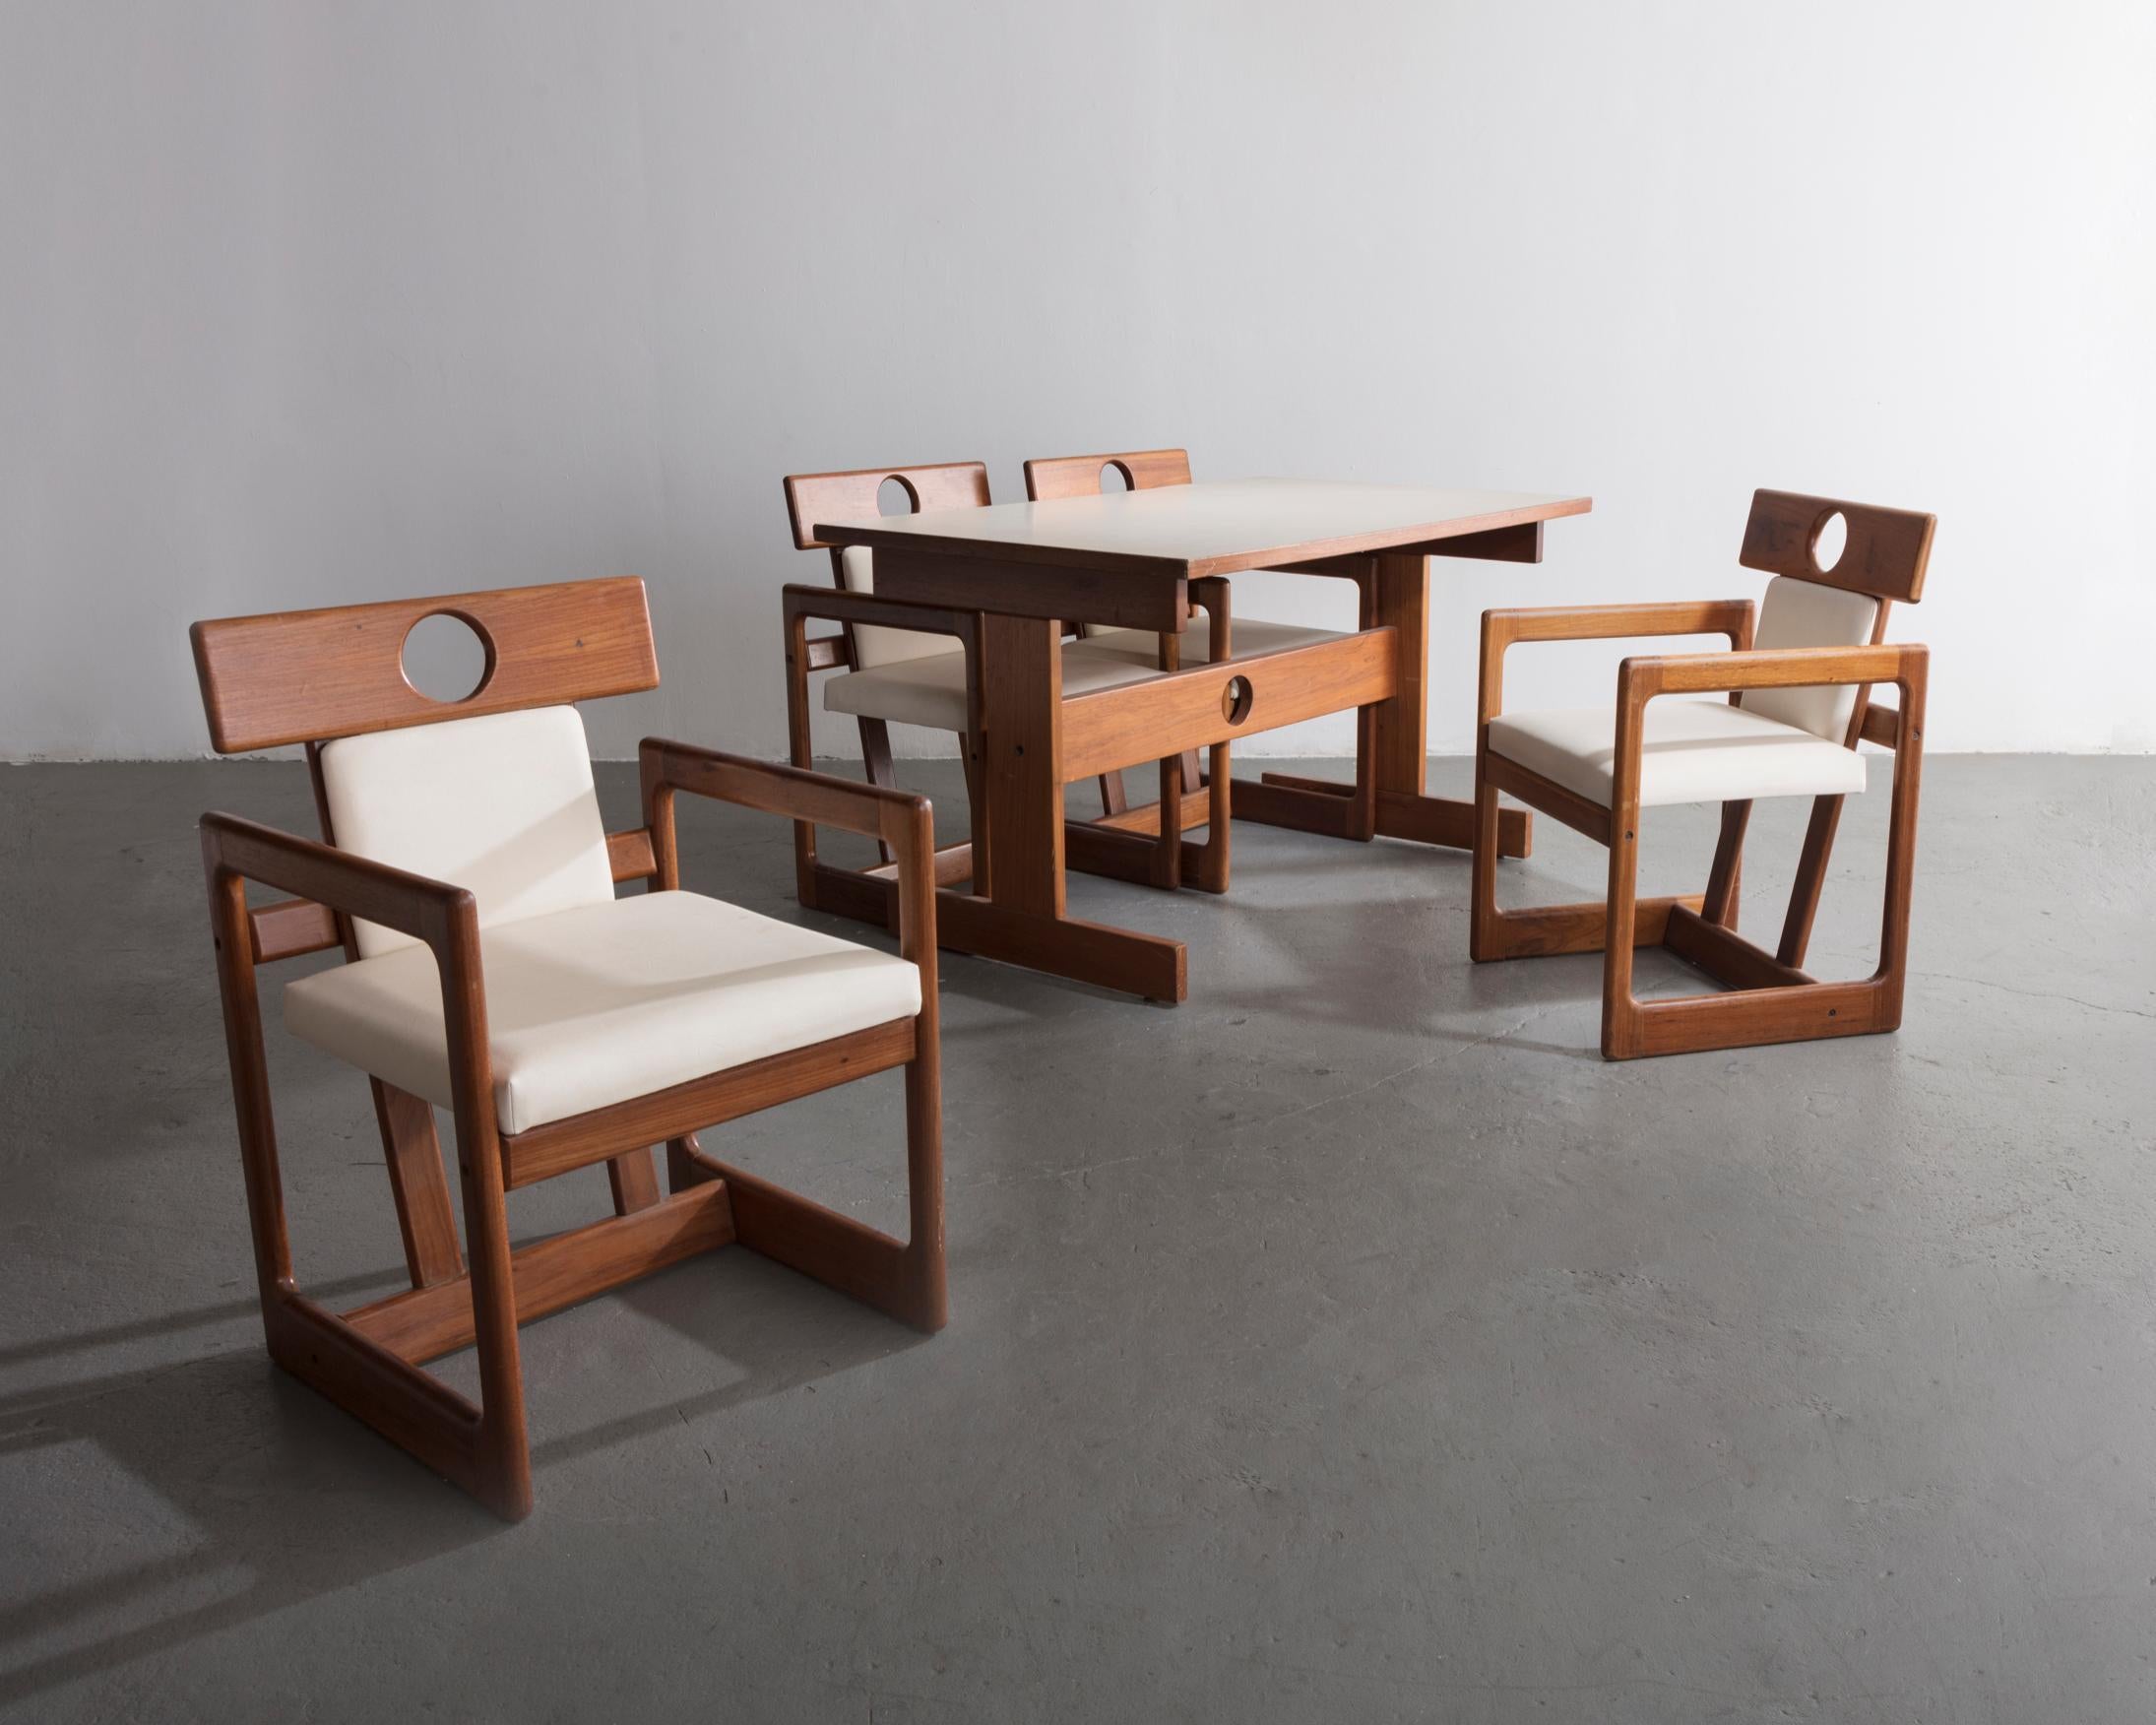 Wood Cuiabá Series Dining Table in Caviona and Formica by Sergio Rodrigues, 1985